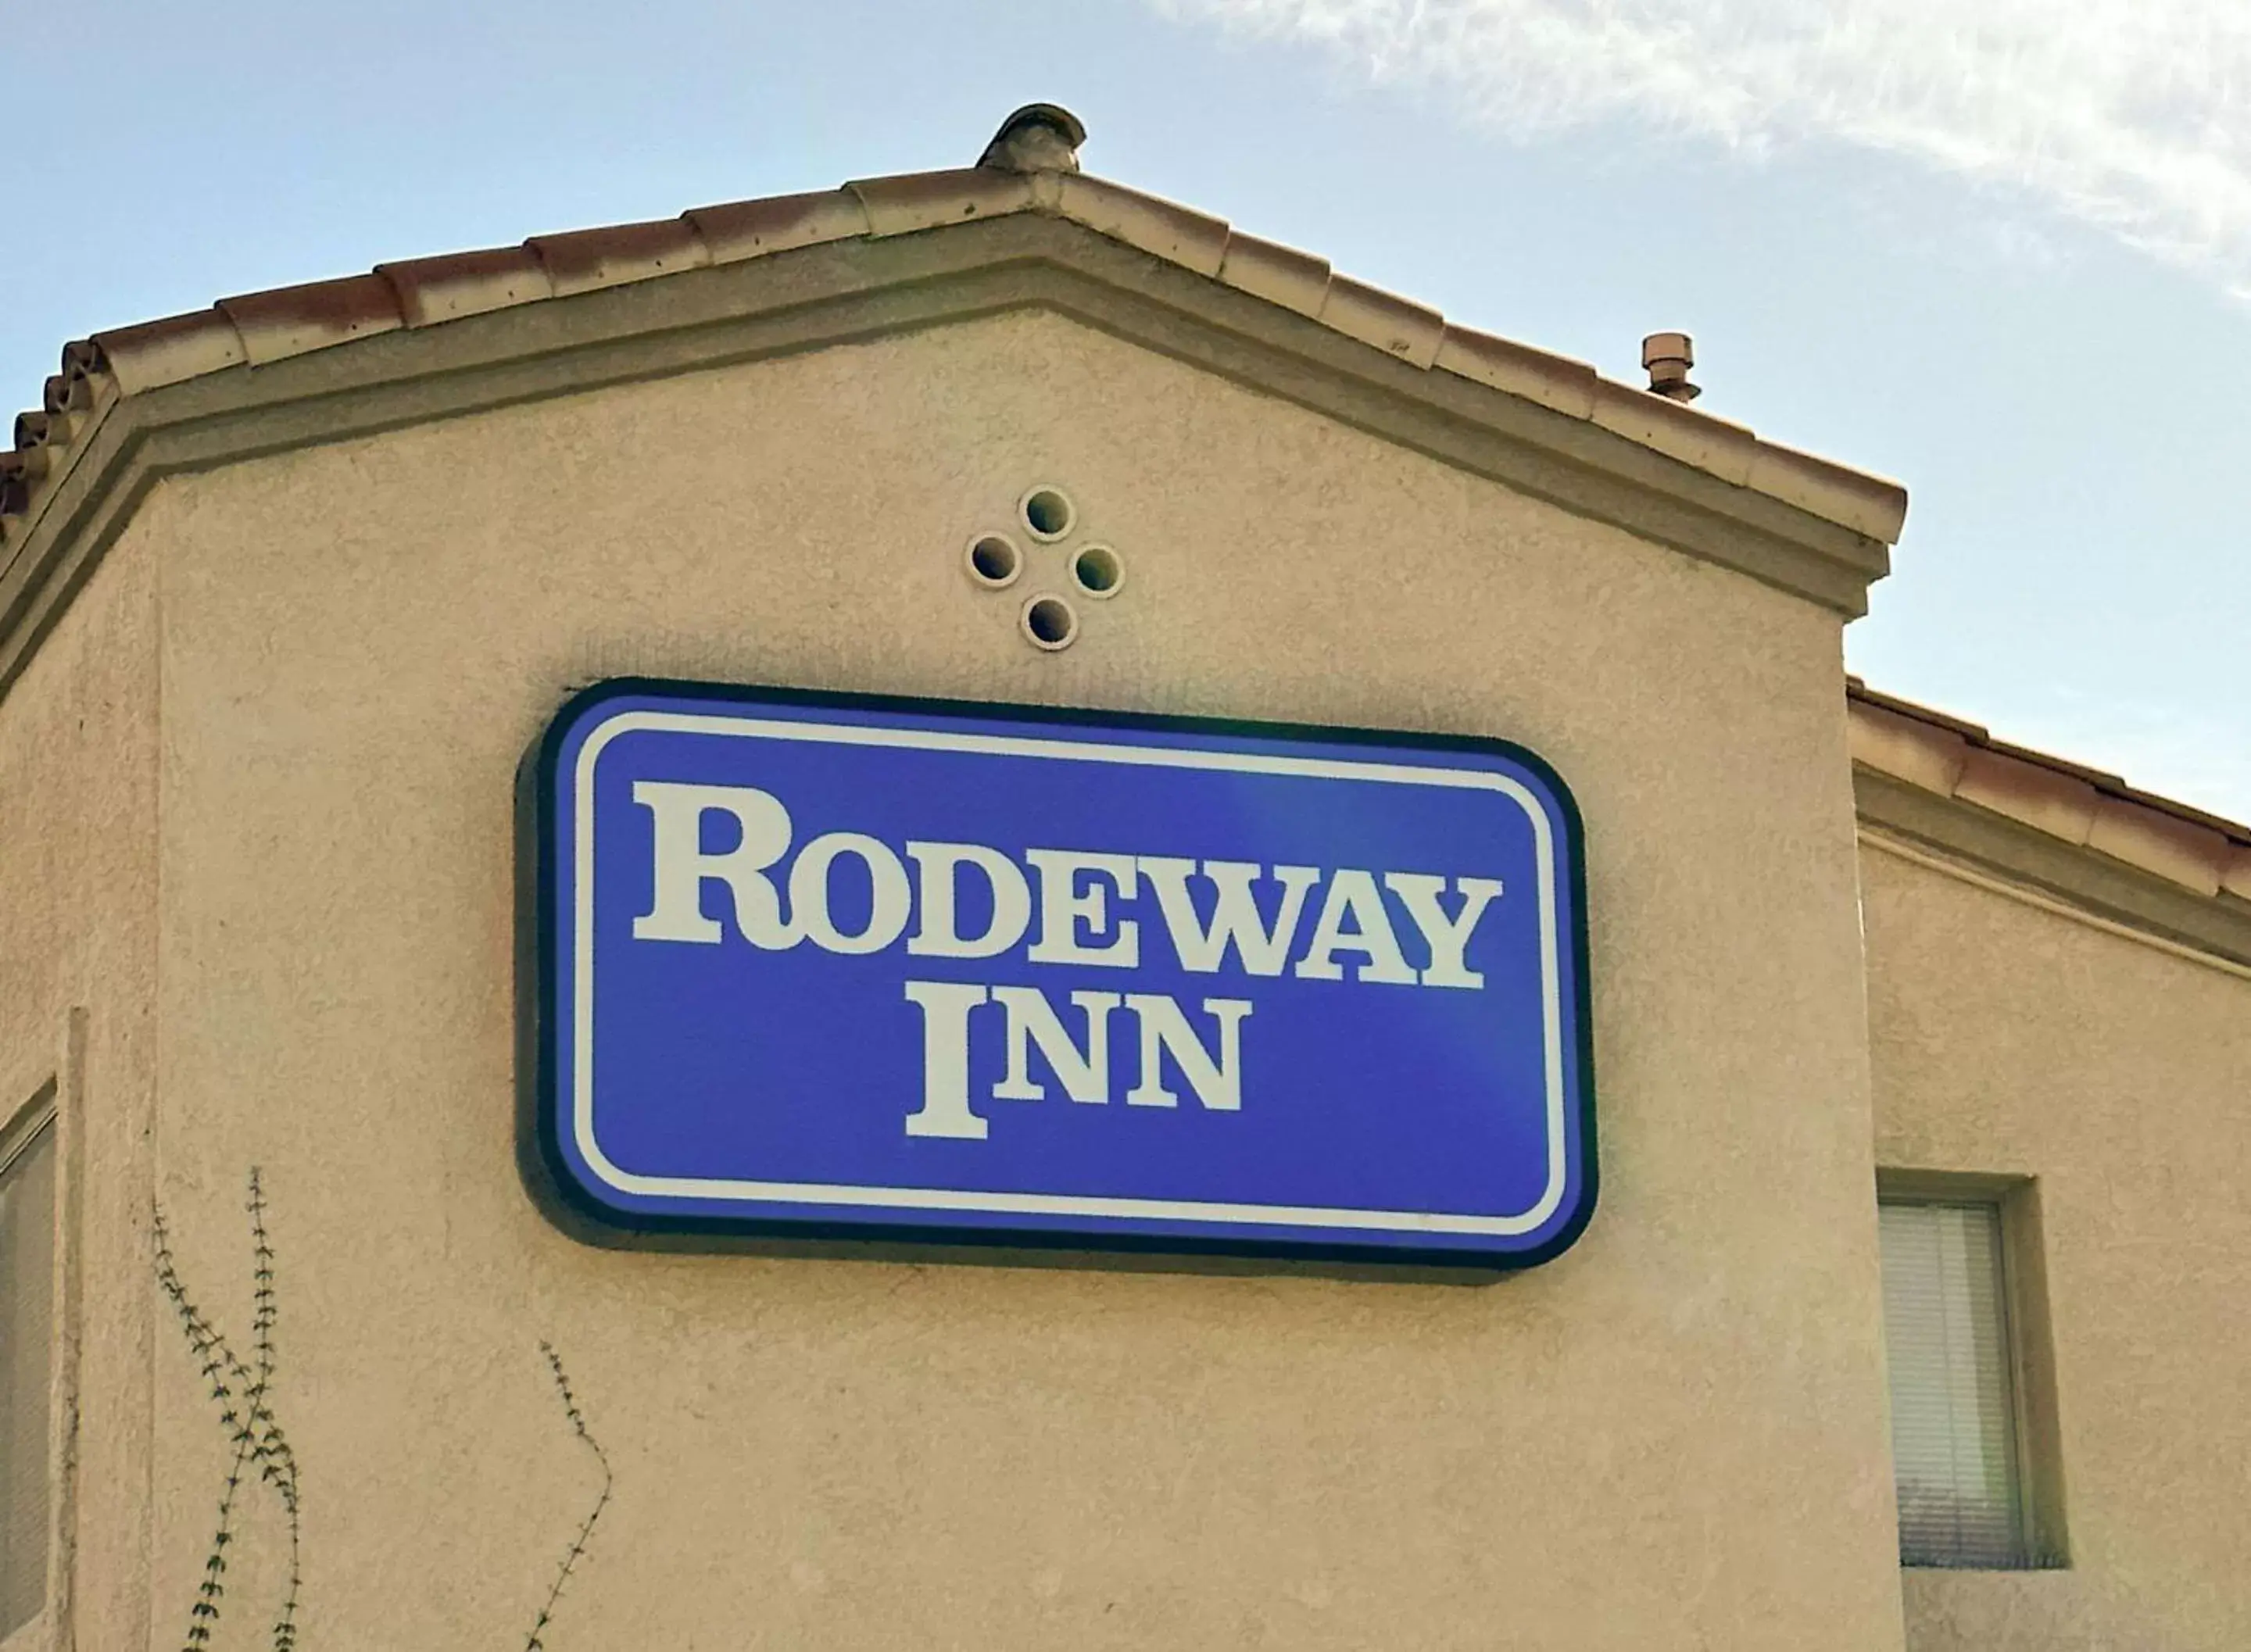 Property building in Rodeway Inn South Gate - Los Angeles South